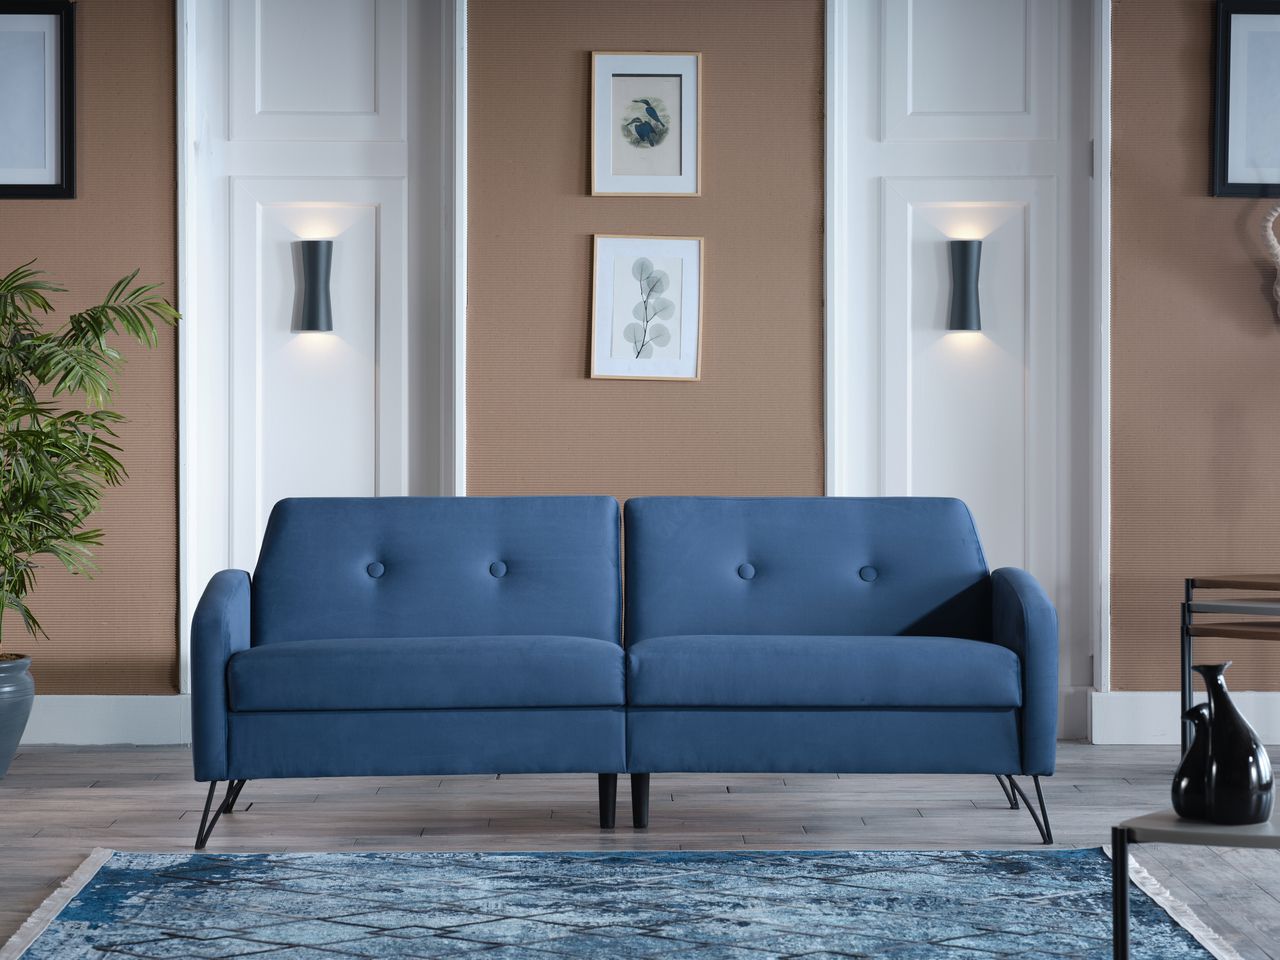 Juniper Vika Navy Blue 3 Seat Sleeper Sofabellona | 1Stopbedrooms In Navy Sleeper Sofa Couches (View 8 of 15)